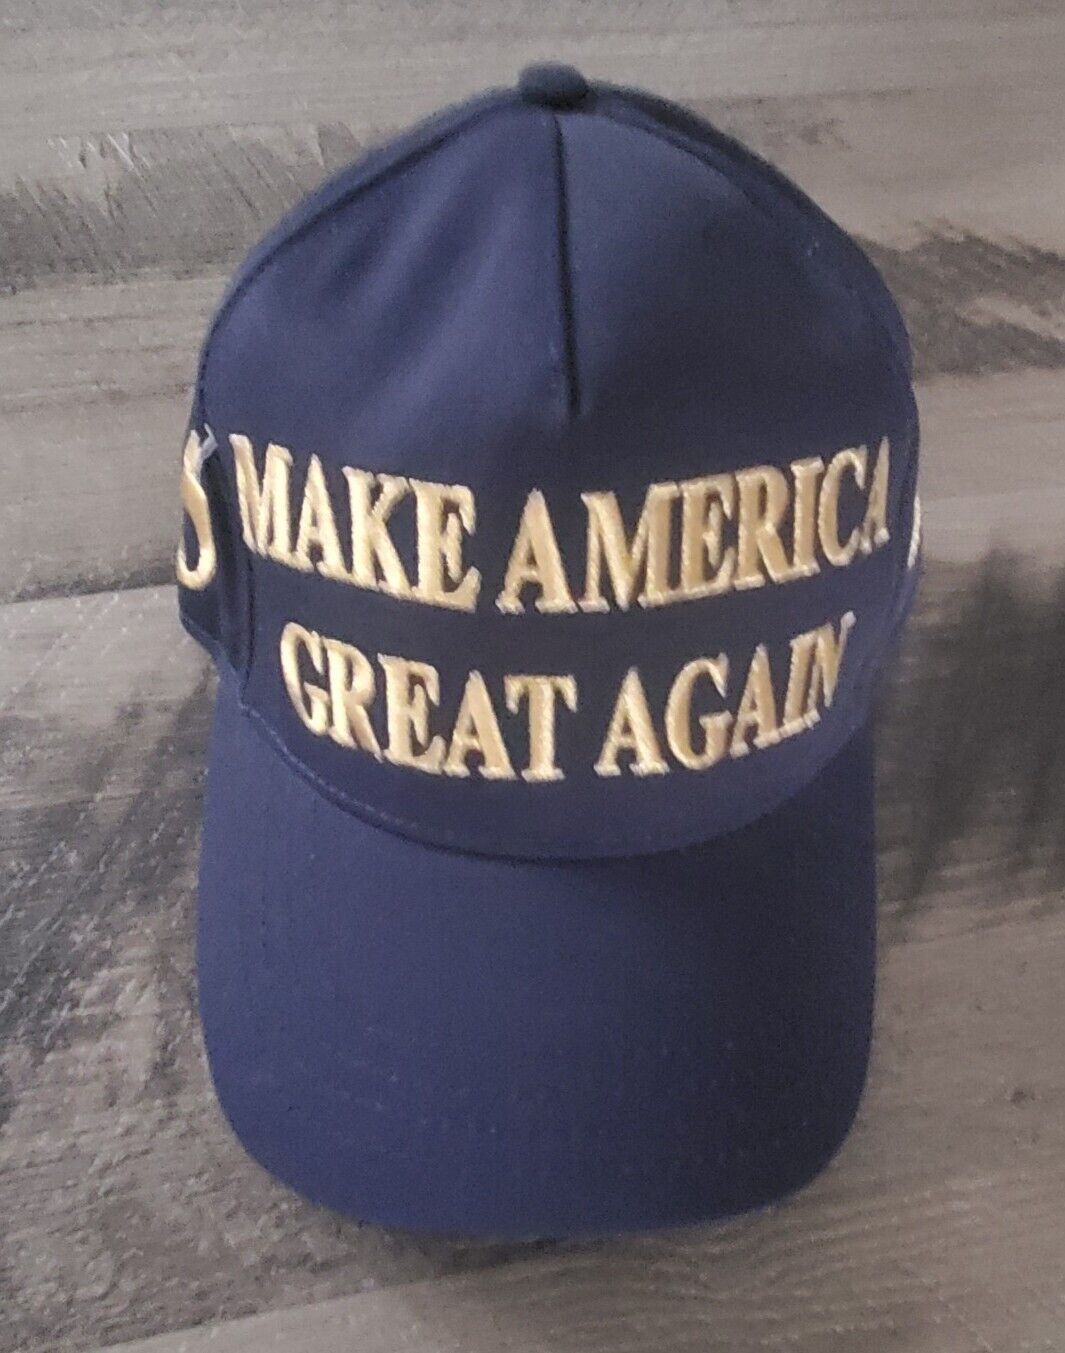 DONALD TRUMP OFFICIAL MAKE AMERICA GREAT AGAIN HAT  2020 New Navy & Gold